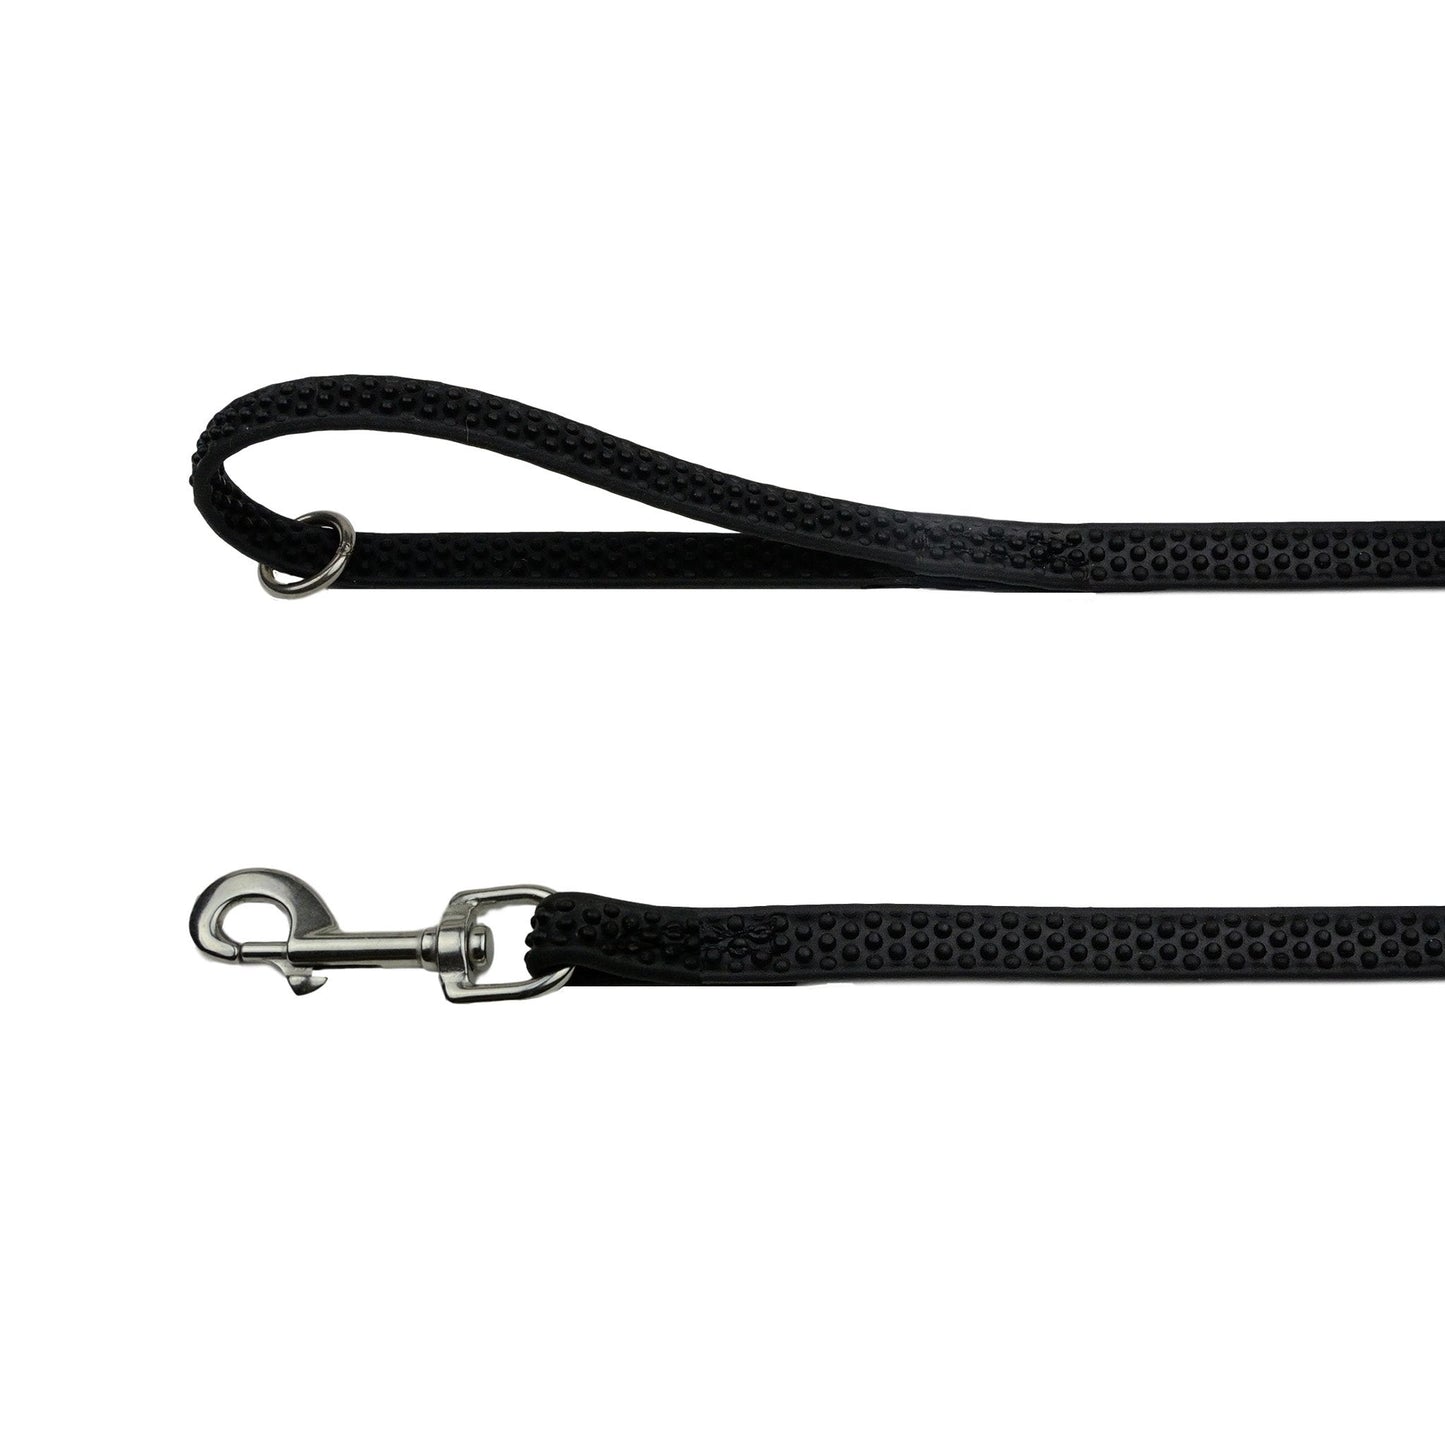 5/8" All Weather Nubby Leash